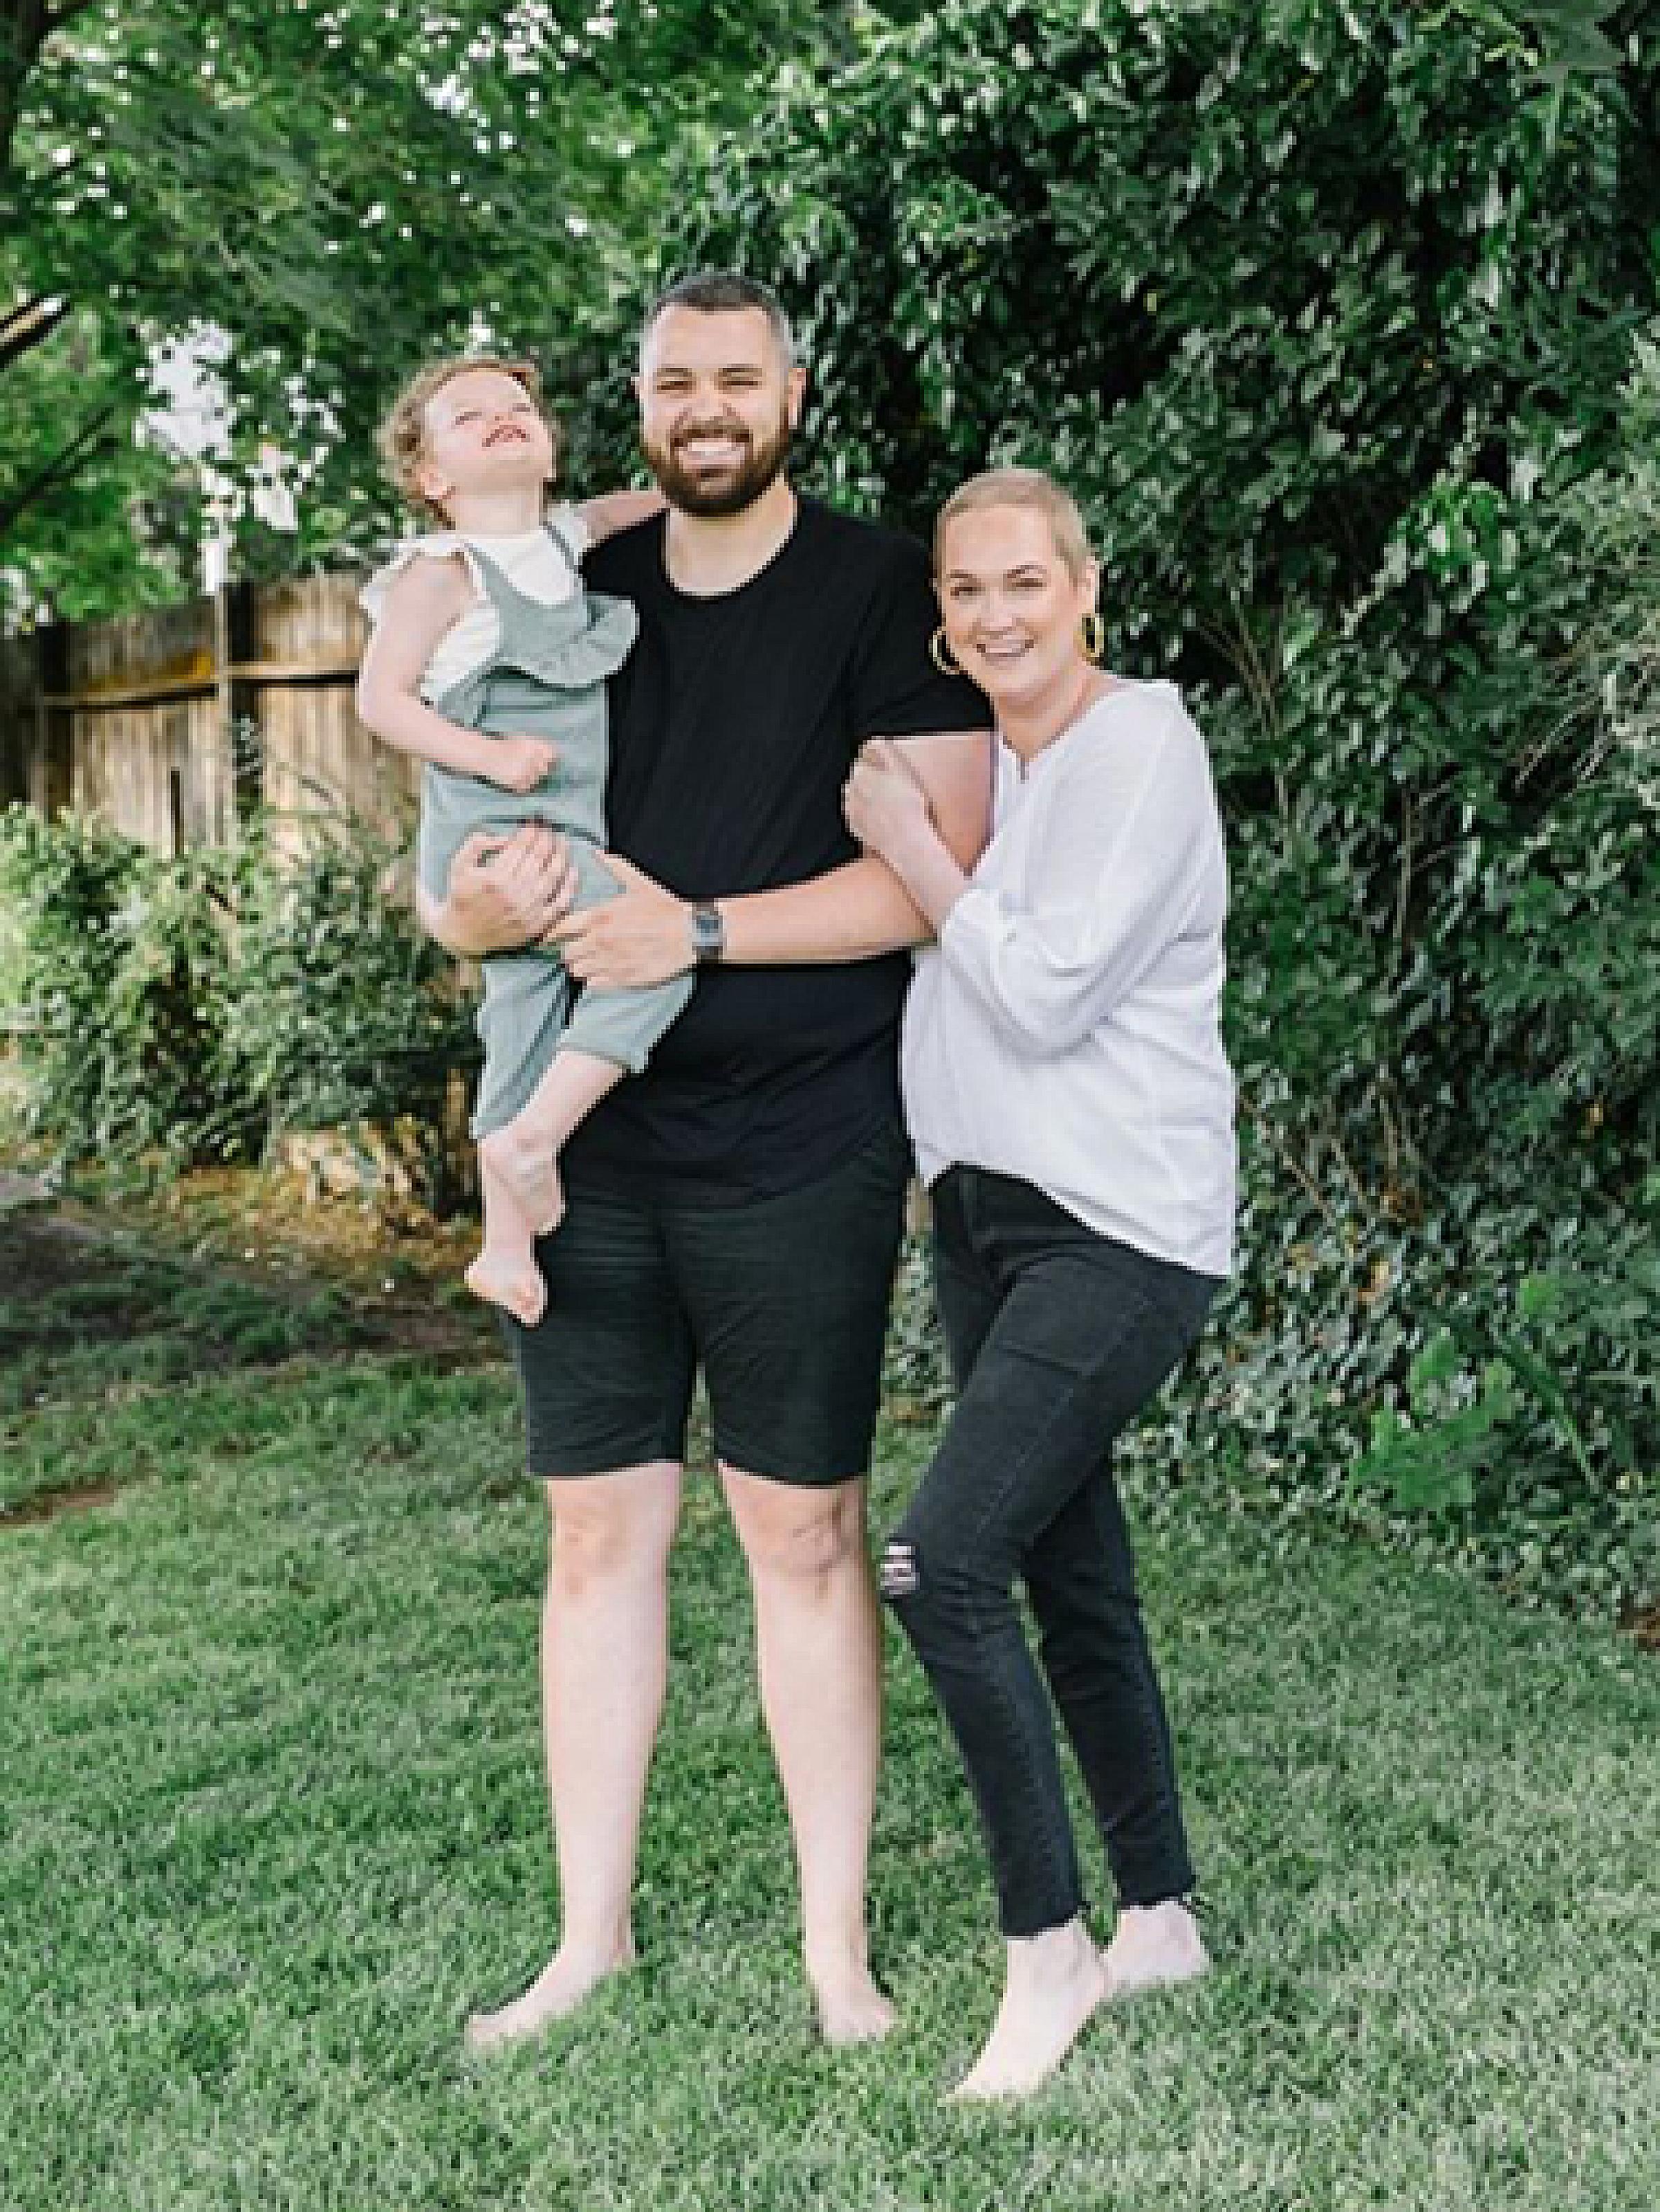 Laura Glissmeyer with her husband and daughter in their backyard